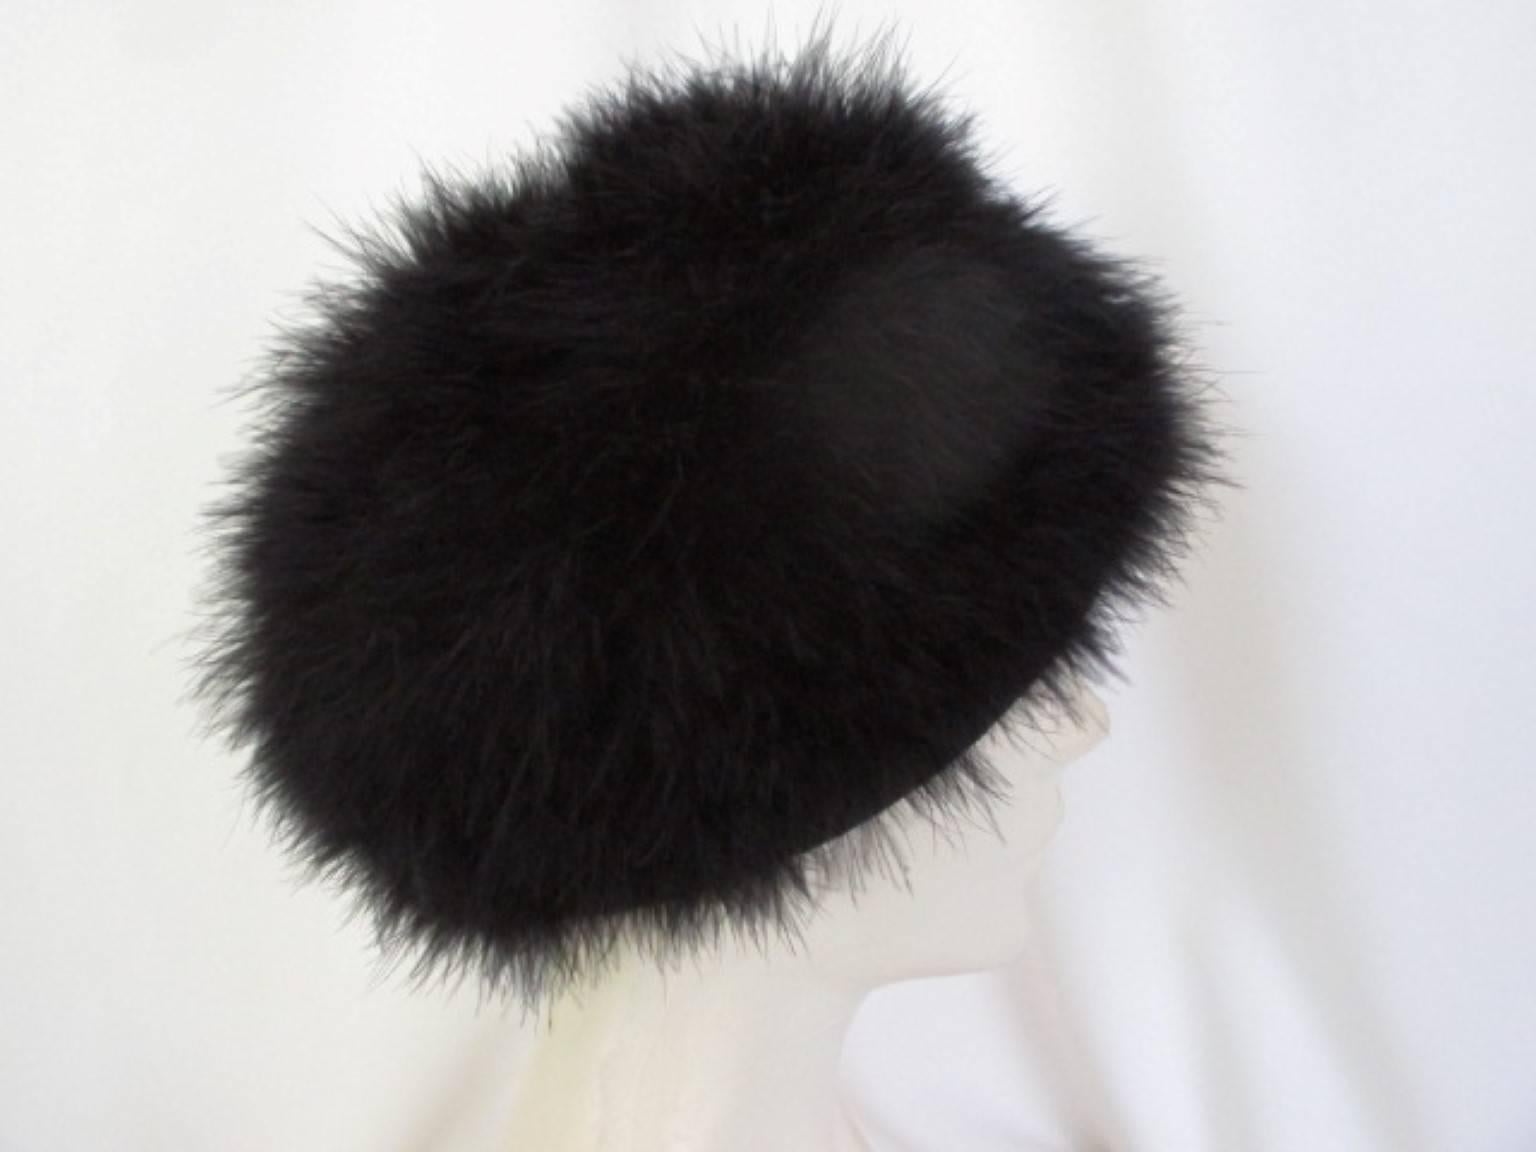 Very nice and light weight marabou hat
In excellent vintage condition
The hat band stretch a little bit
Circumference size 57/58 CM
Please note that vintage items are not new and therefore might have minor imperfections